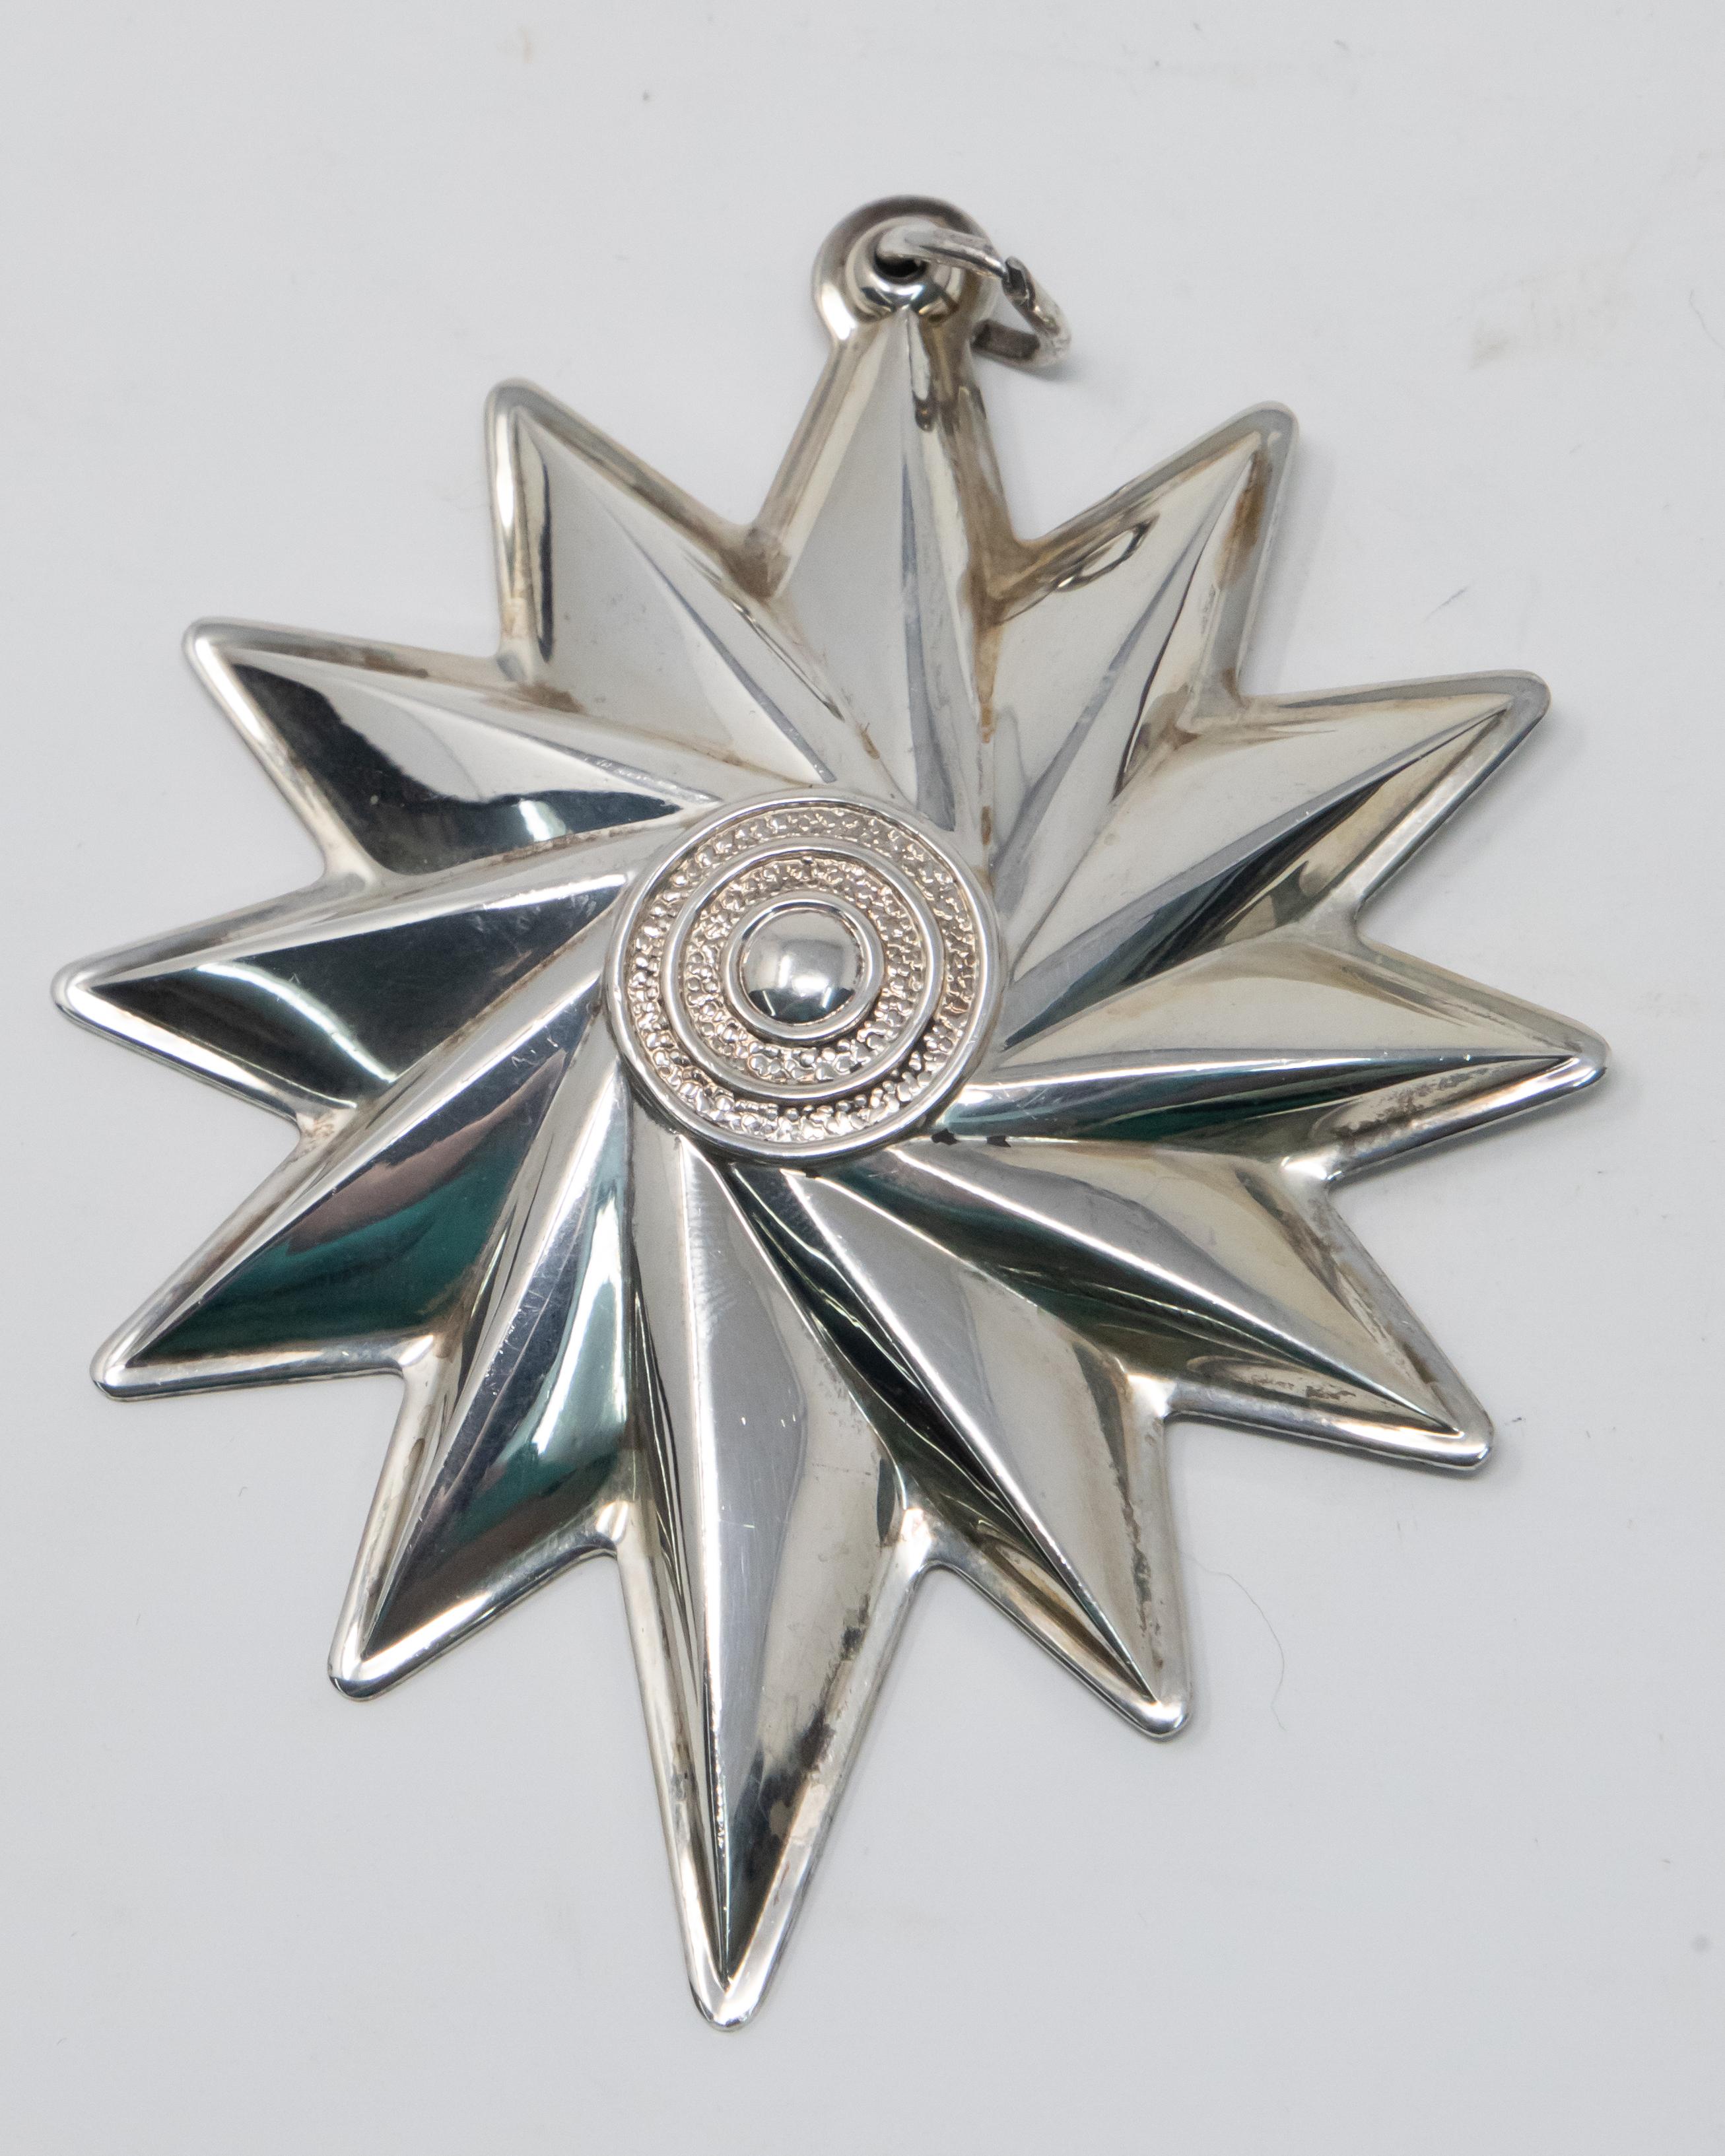 Offering this stunning Lunt sterling spiral star ornament from 1999. Starting in the center with a bullseye with punch work between the rings. From there go outward in a geometric spiral pattern. Simple lines make this piece dance in your eyes.